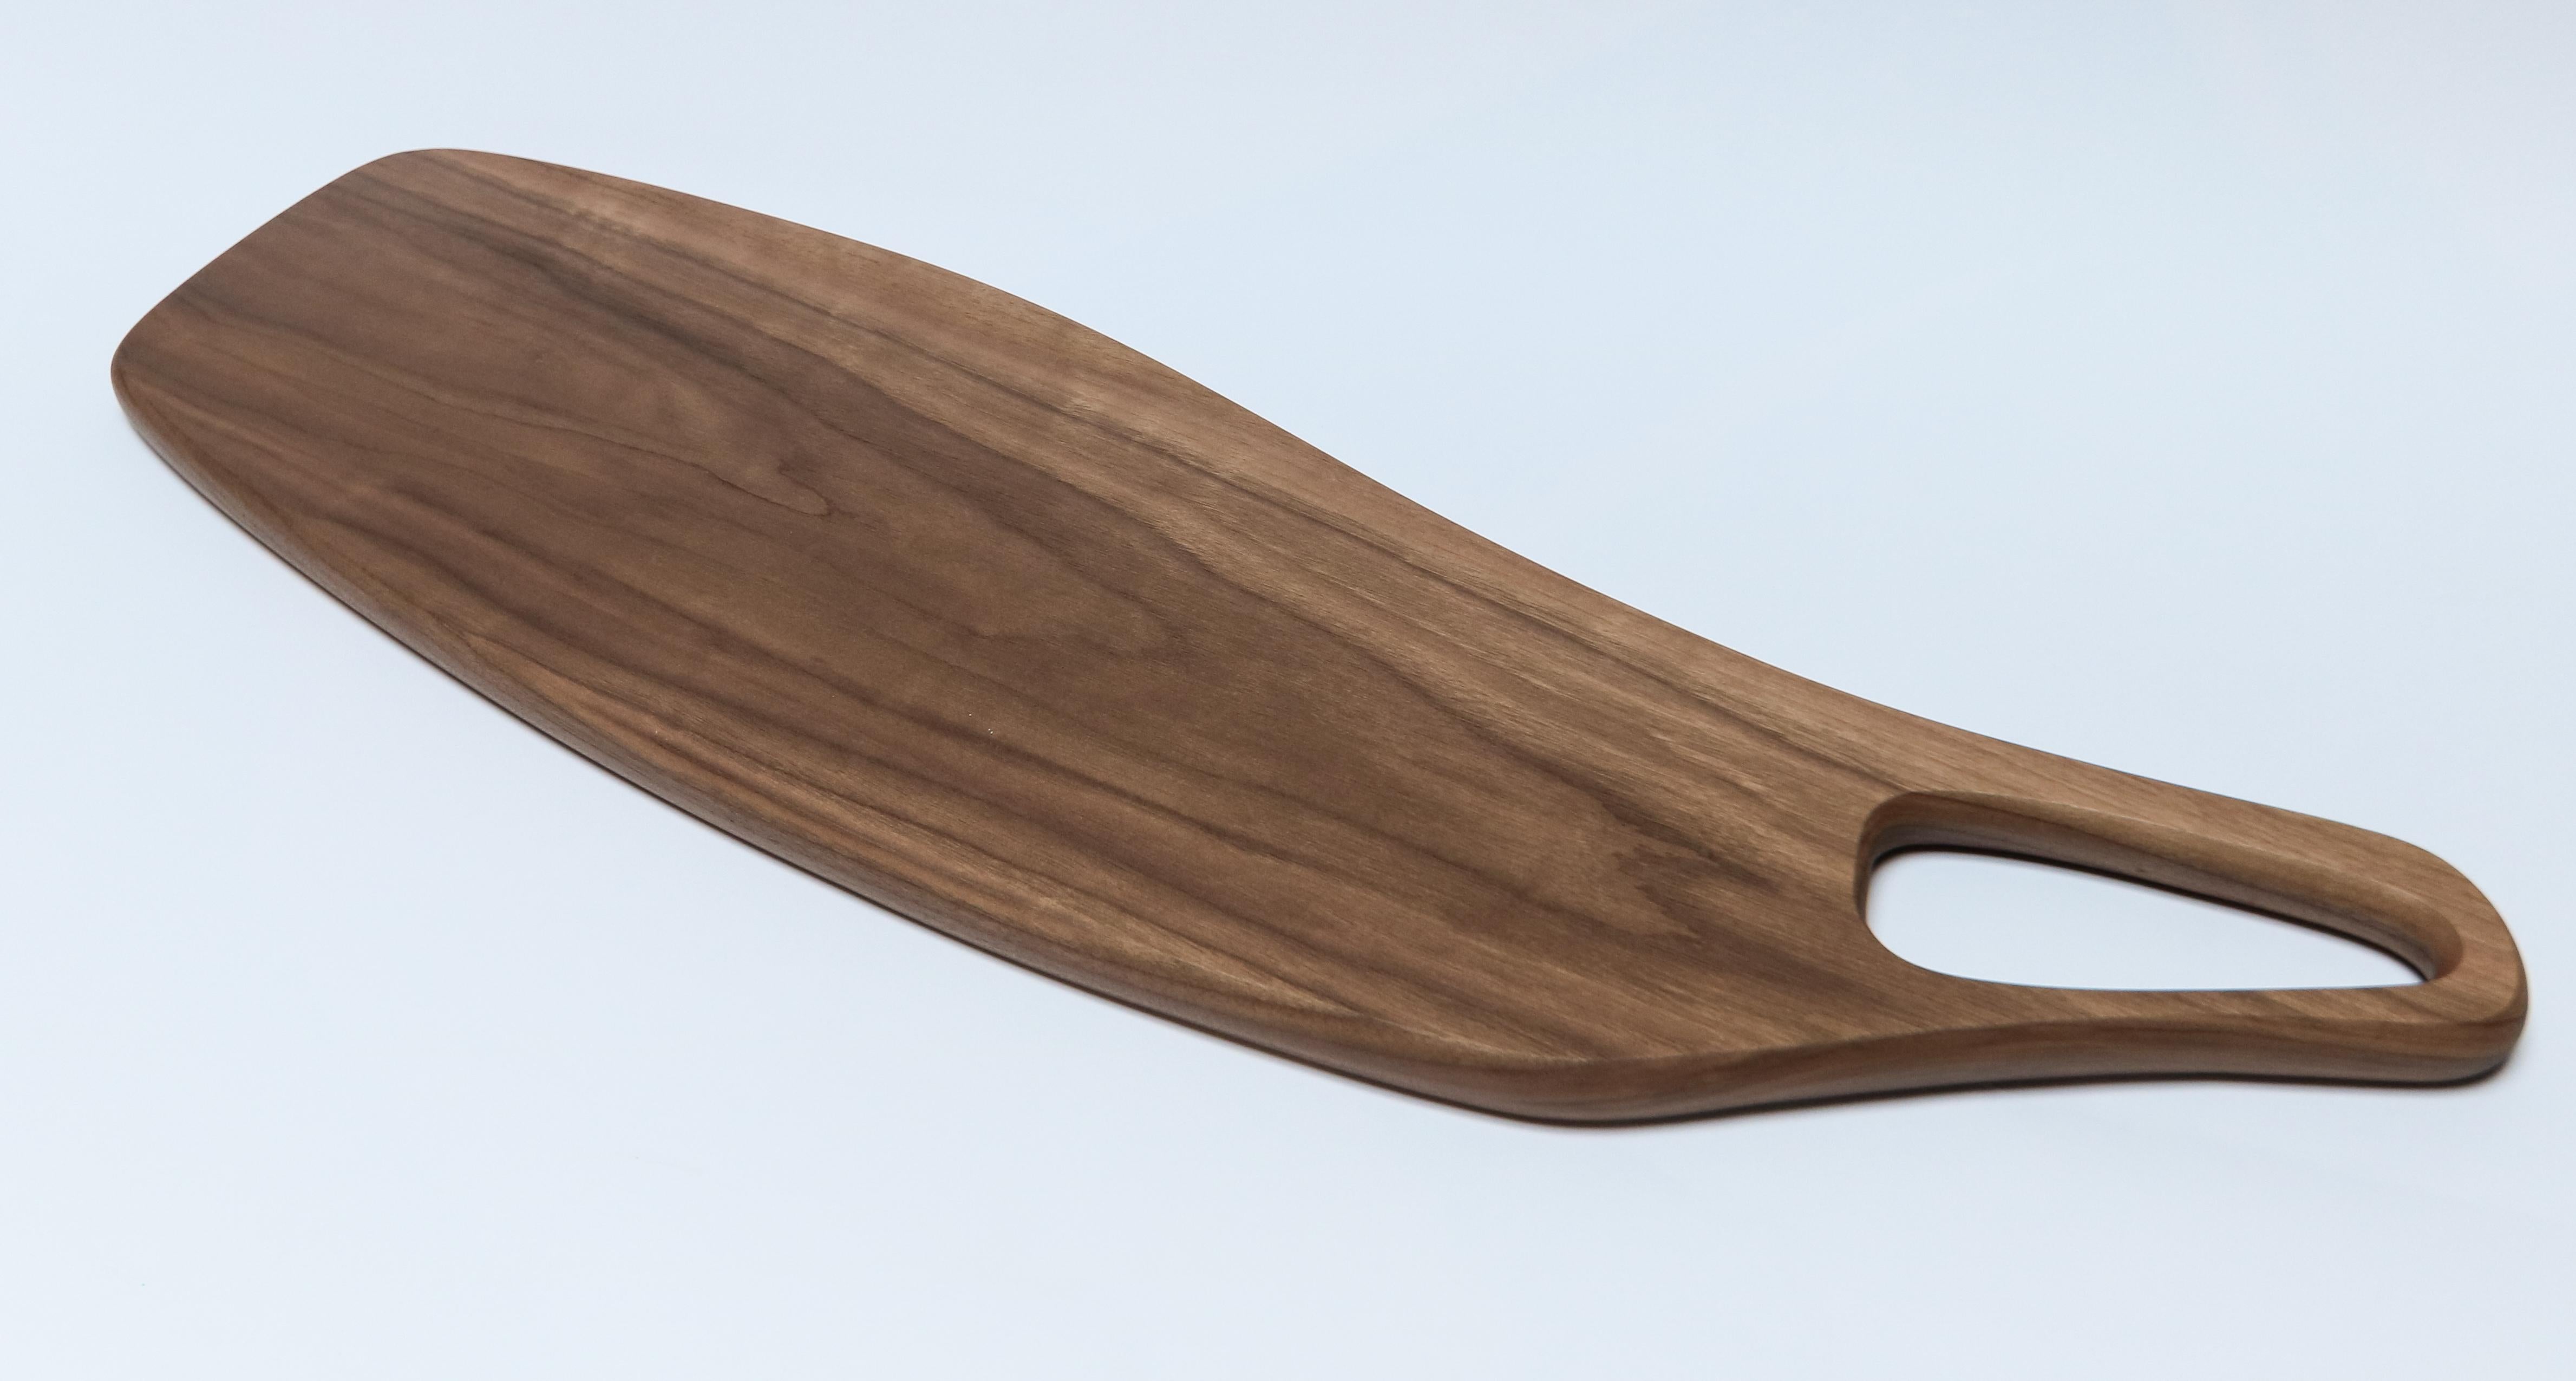 Custom oblong serving board in oak & walnut by Adesso Imports. Can be done in different sizes and woods.